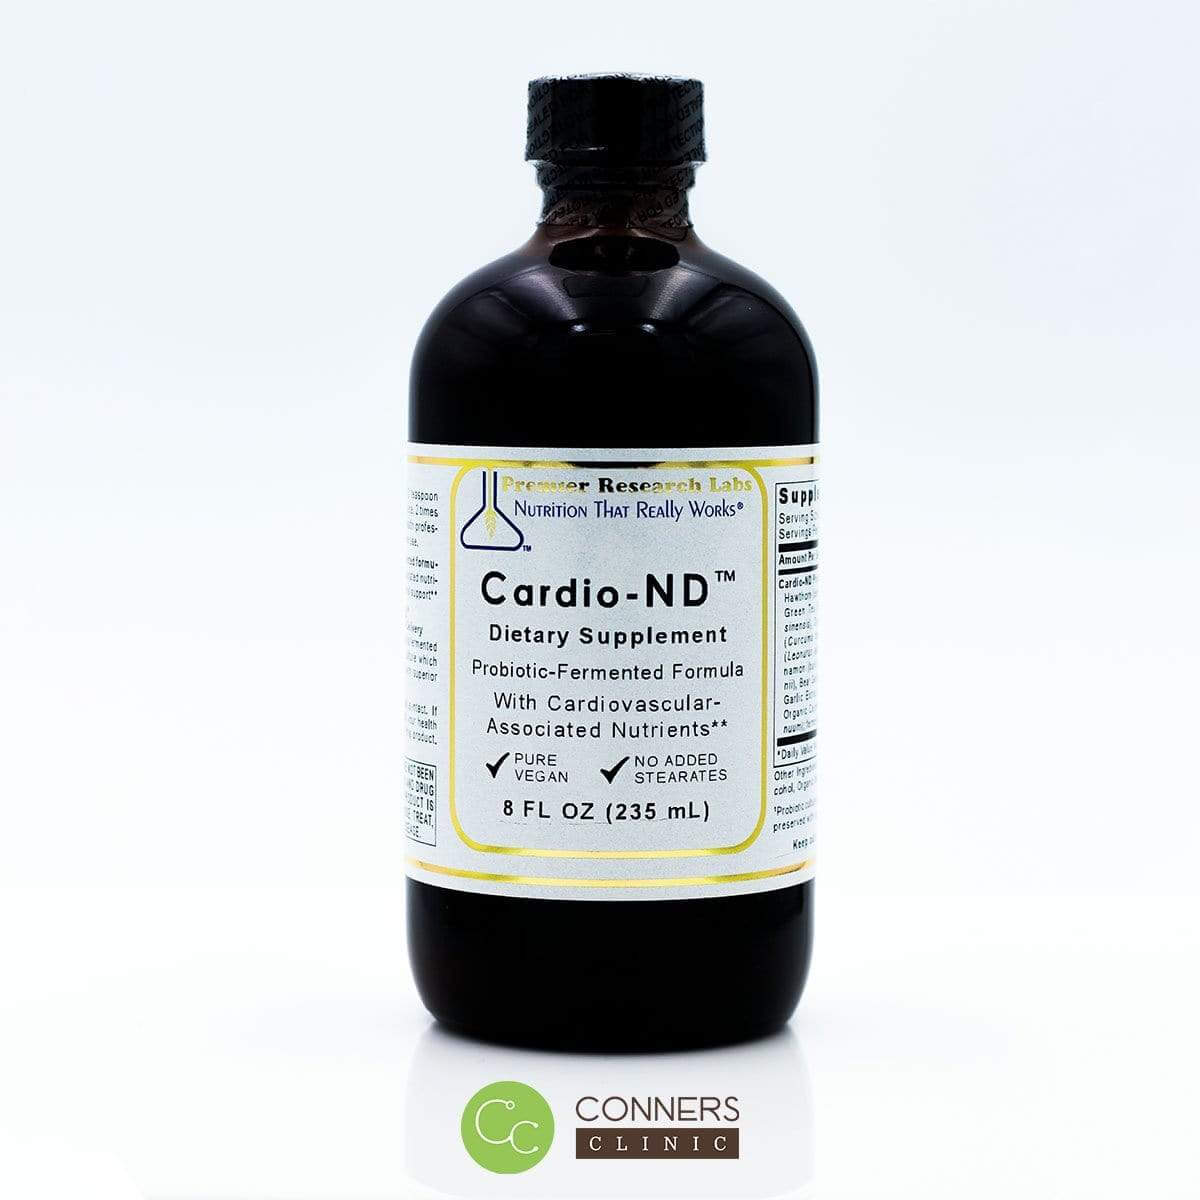 Cardio-ND- 8 fl oz Premier Research Labs Supplement - Conners Clinic